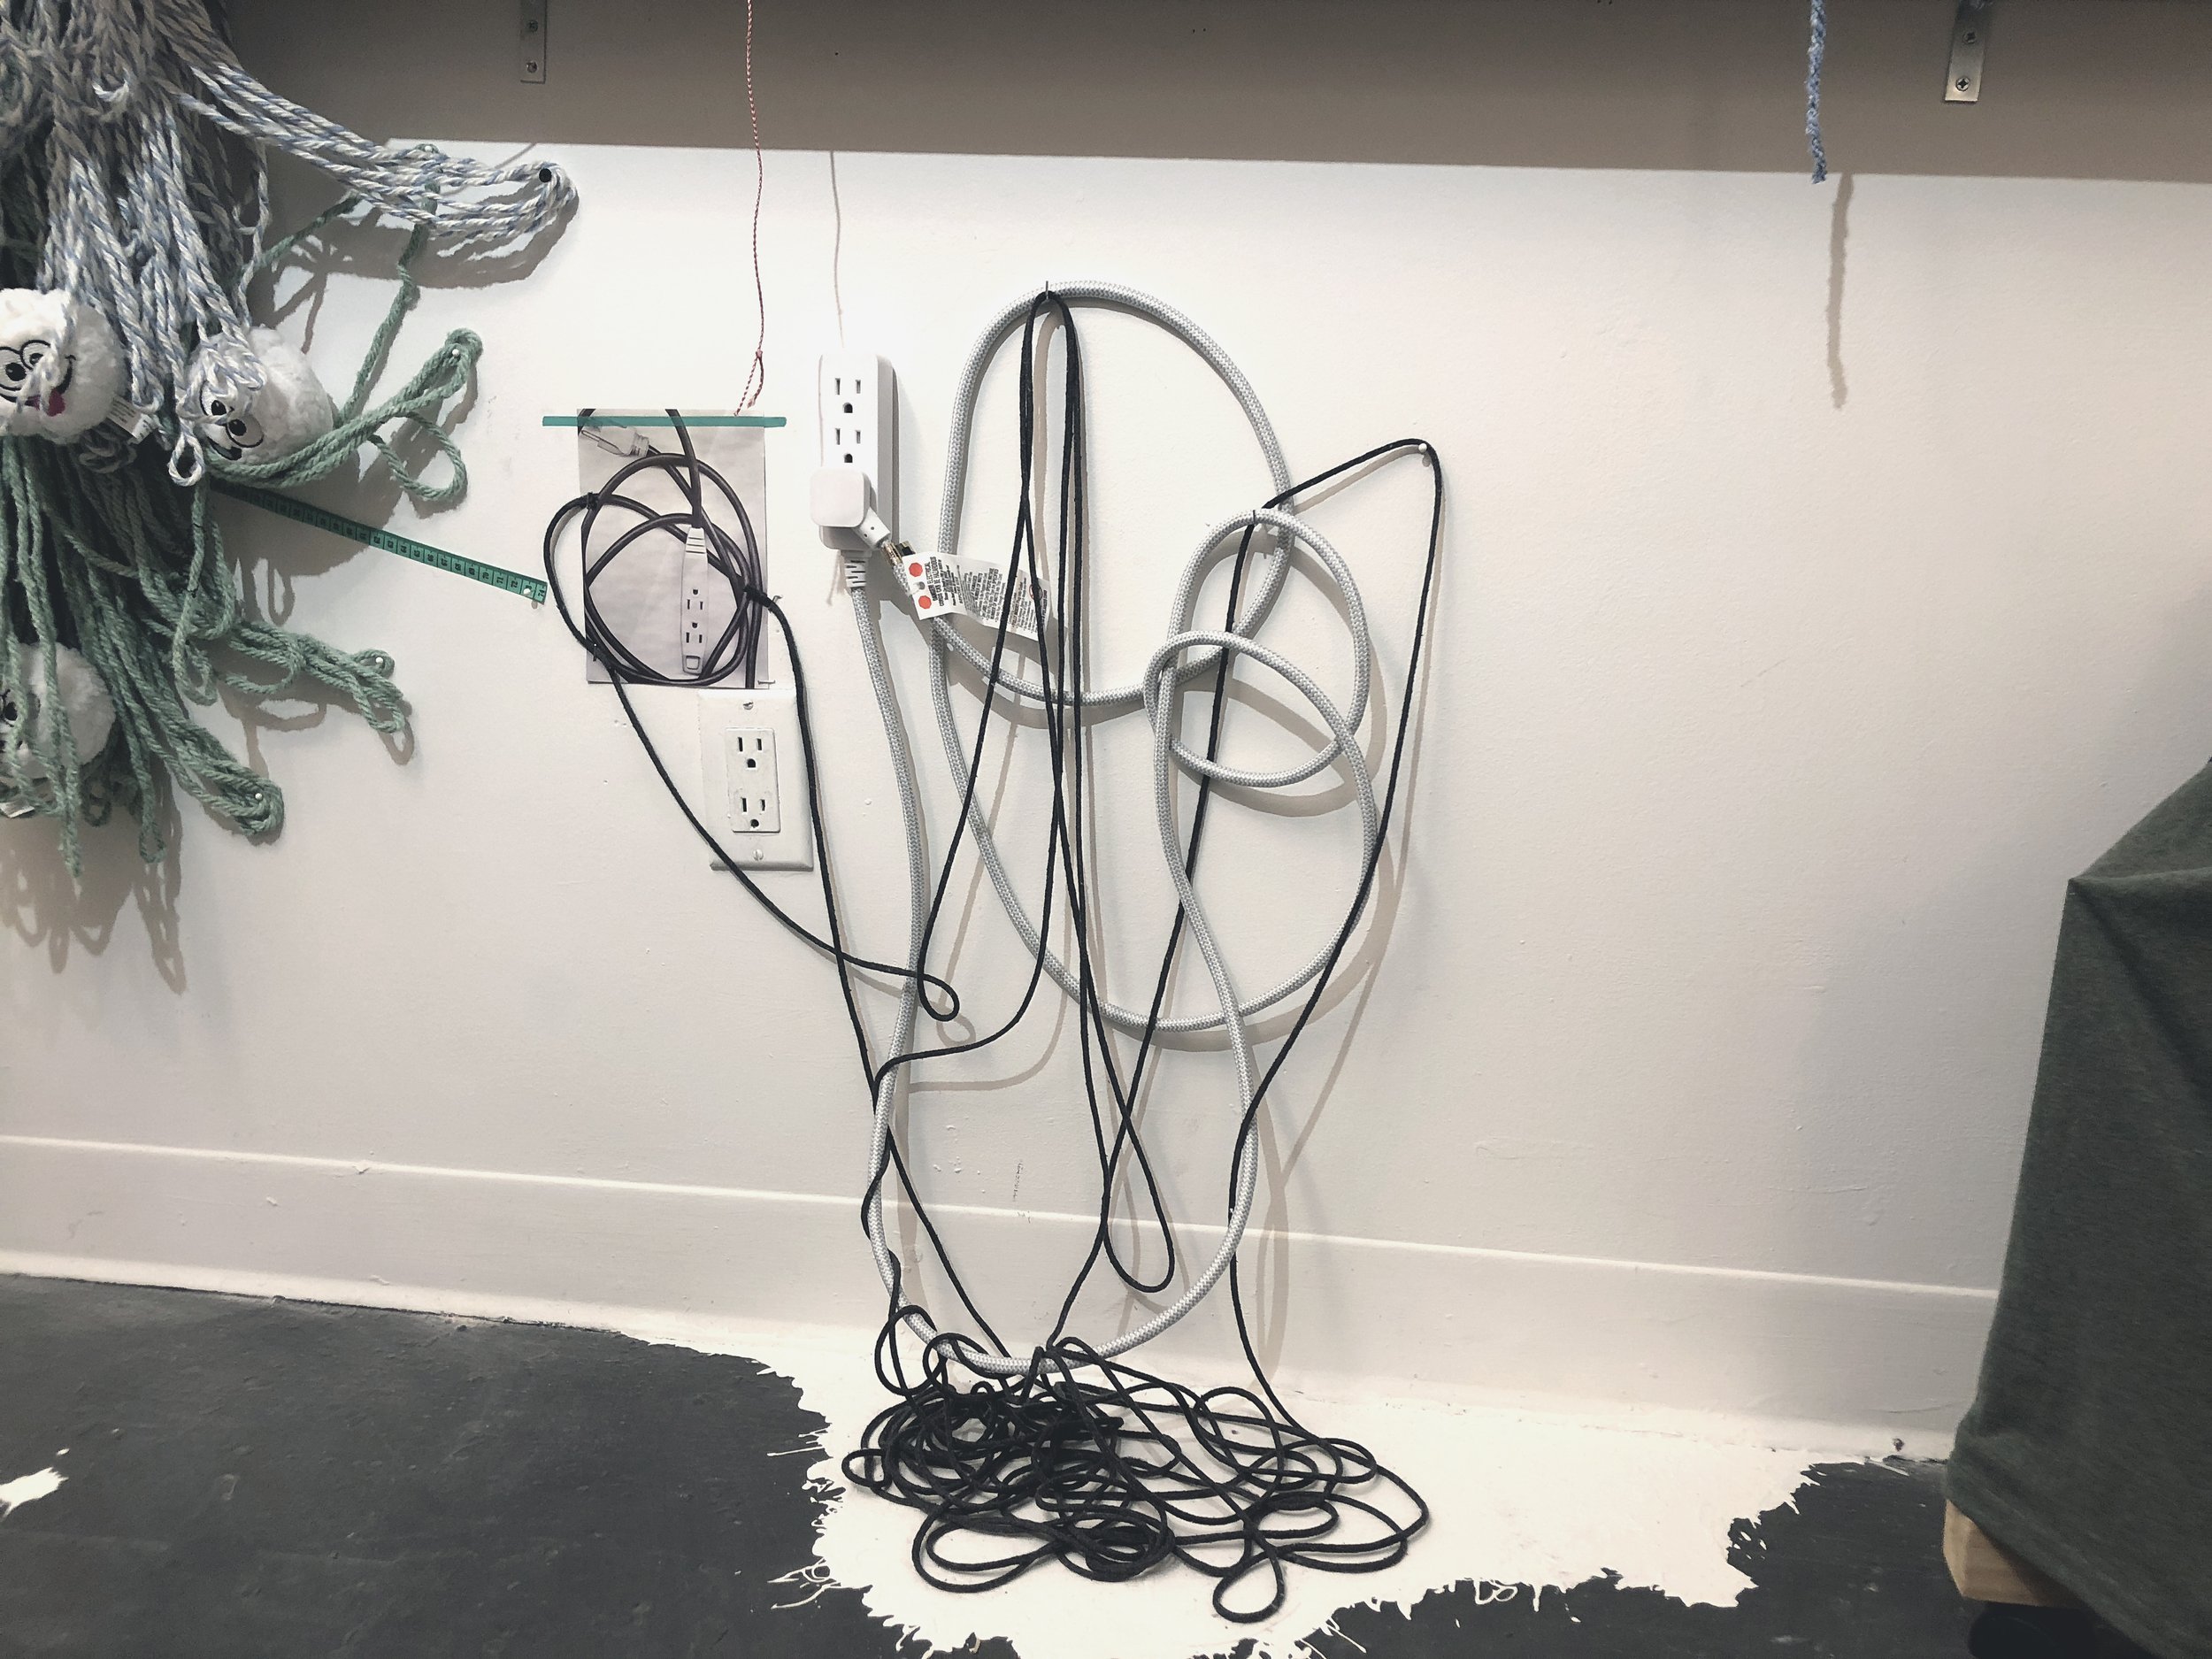 Part of the installation ( "So much like the outlet extension cord which is plugging into itself")